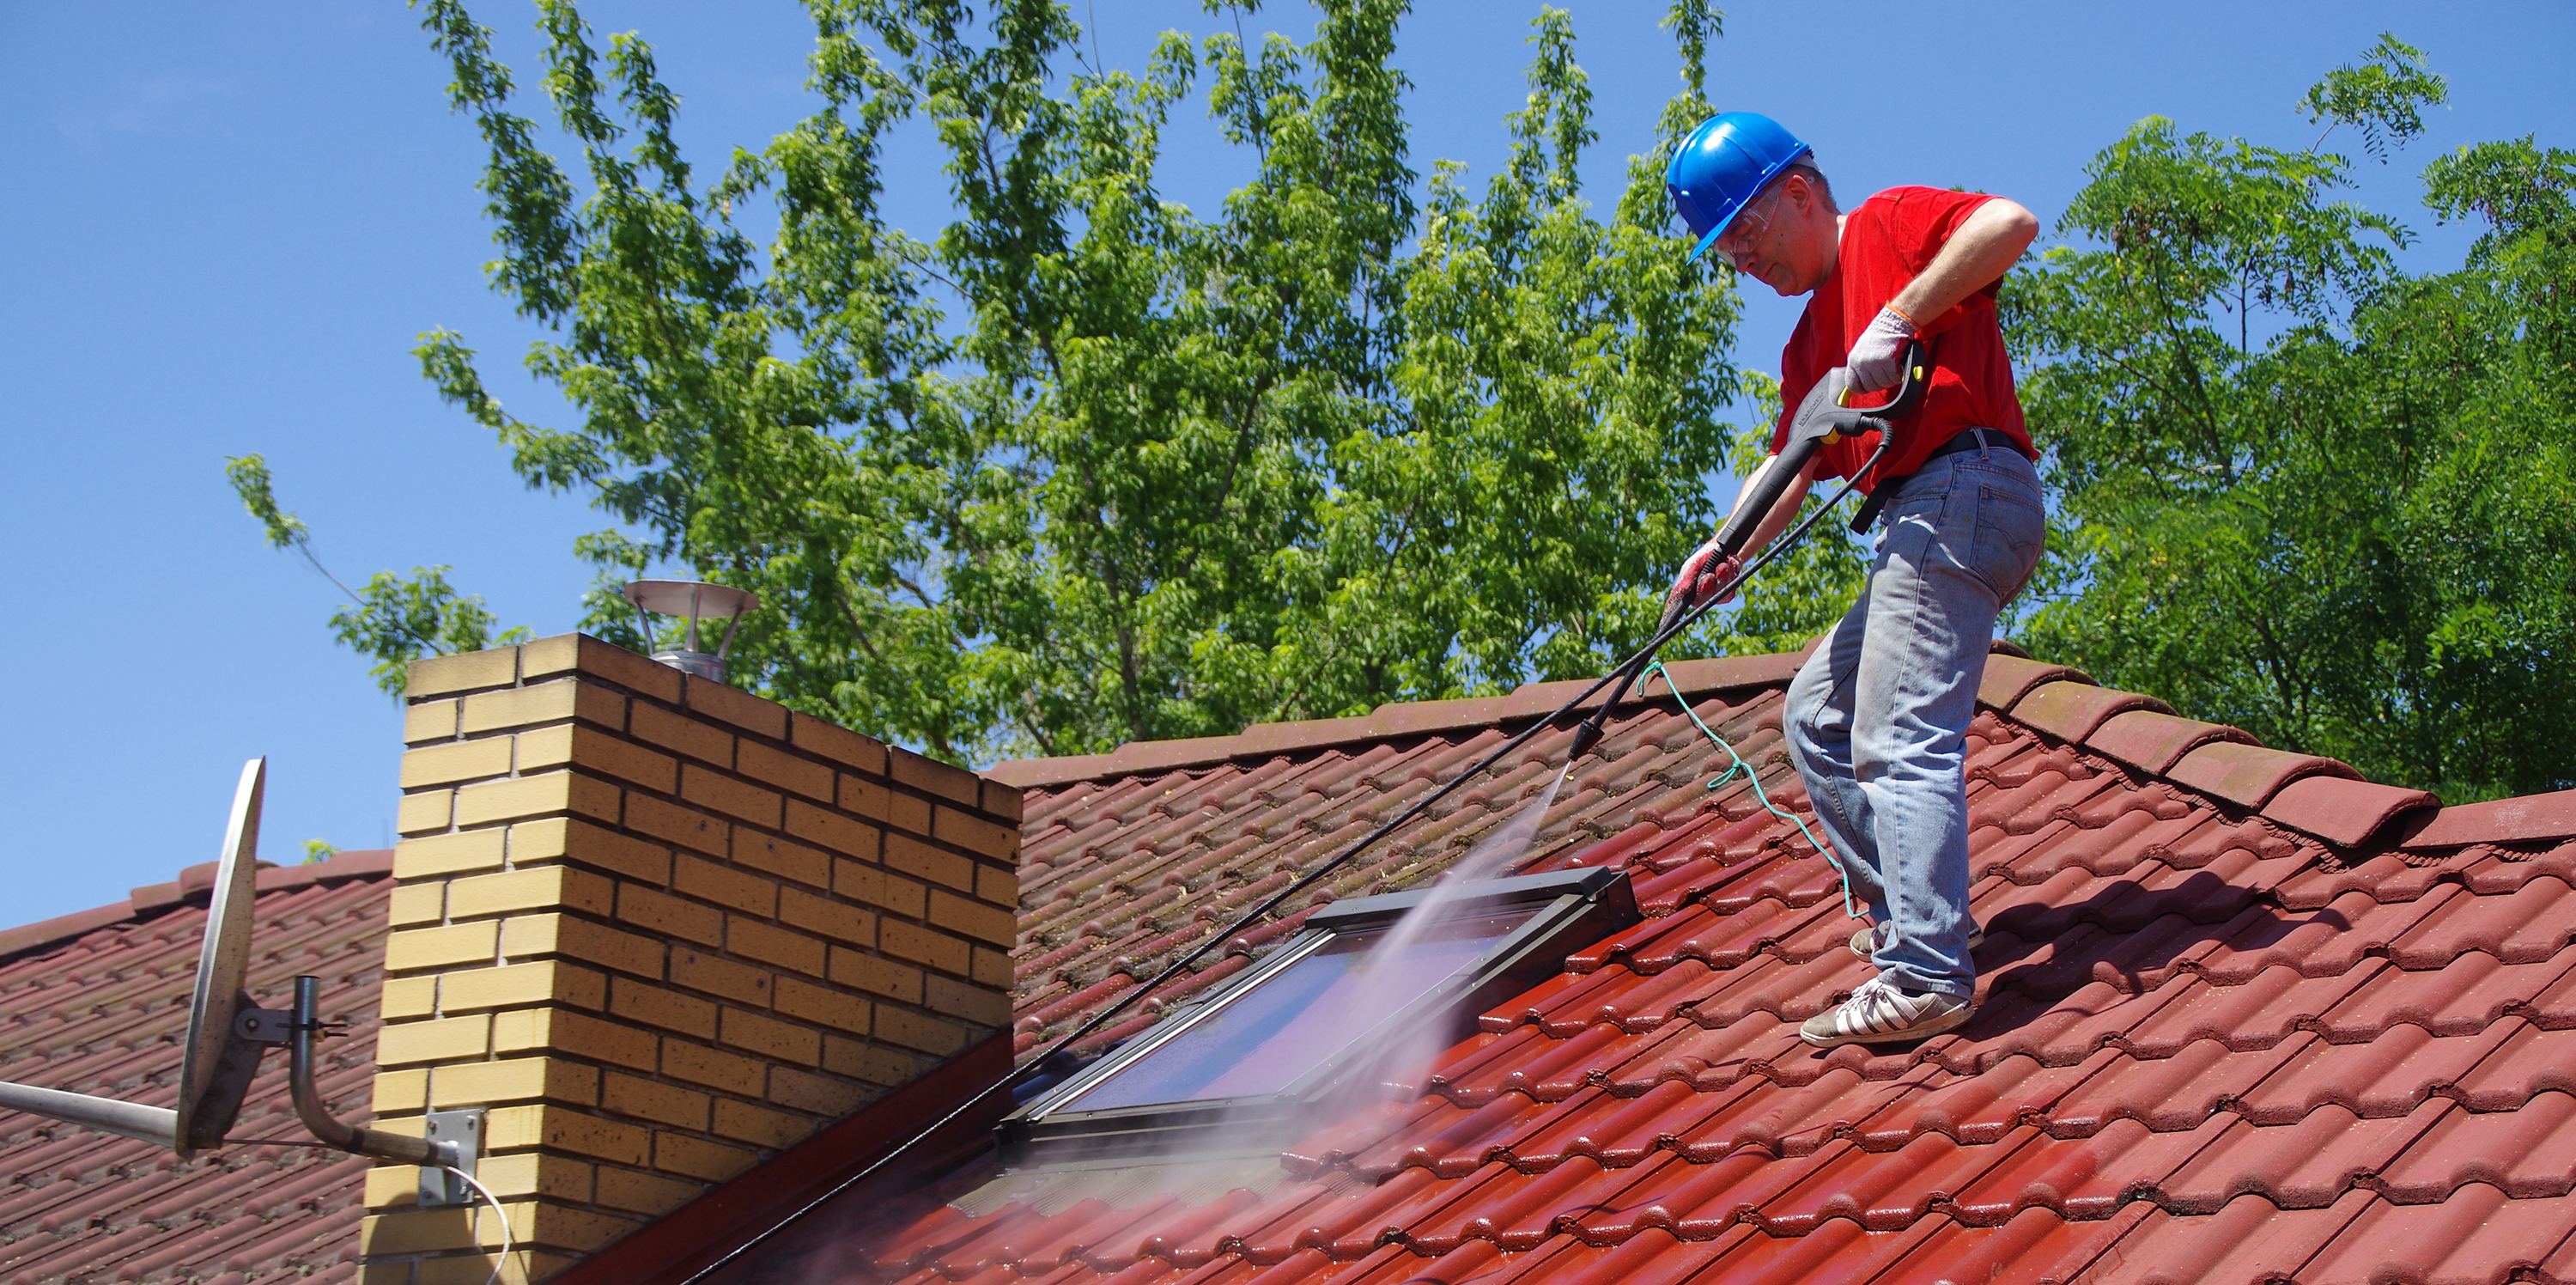 Roof cleaning roofing services in seattle